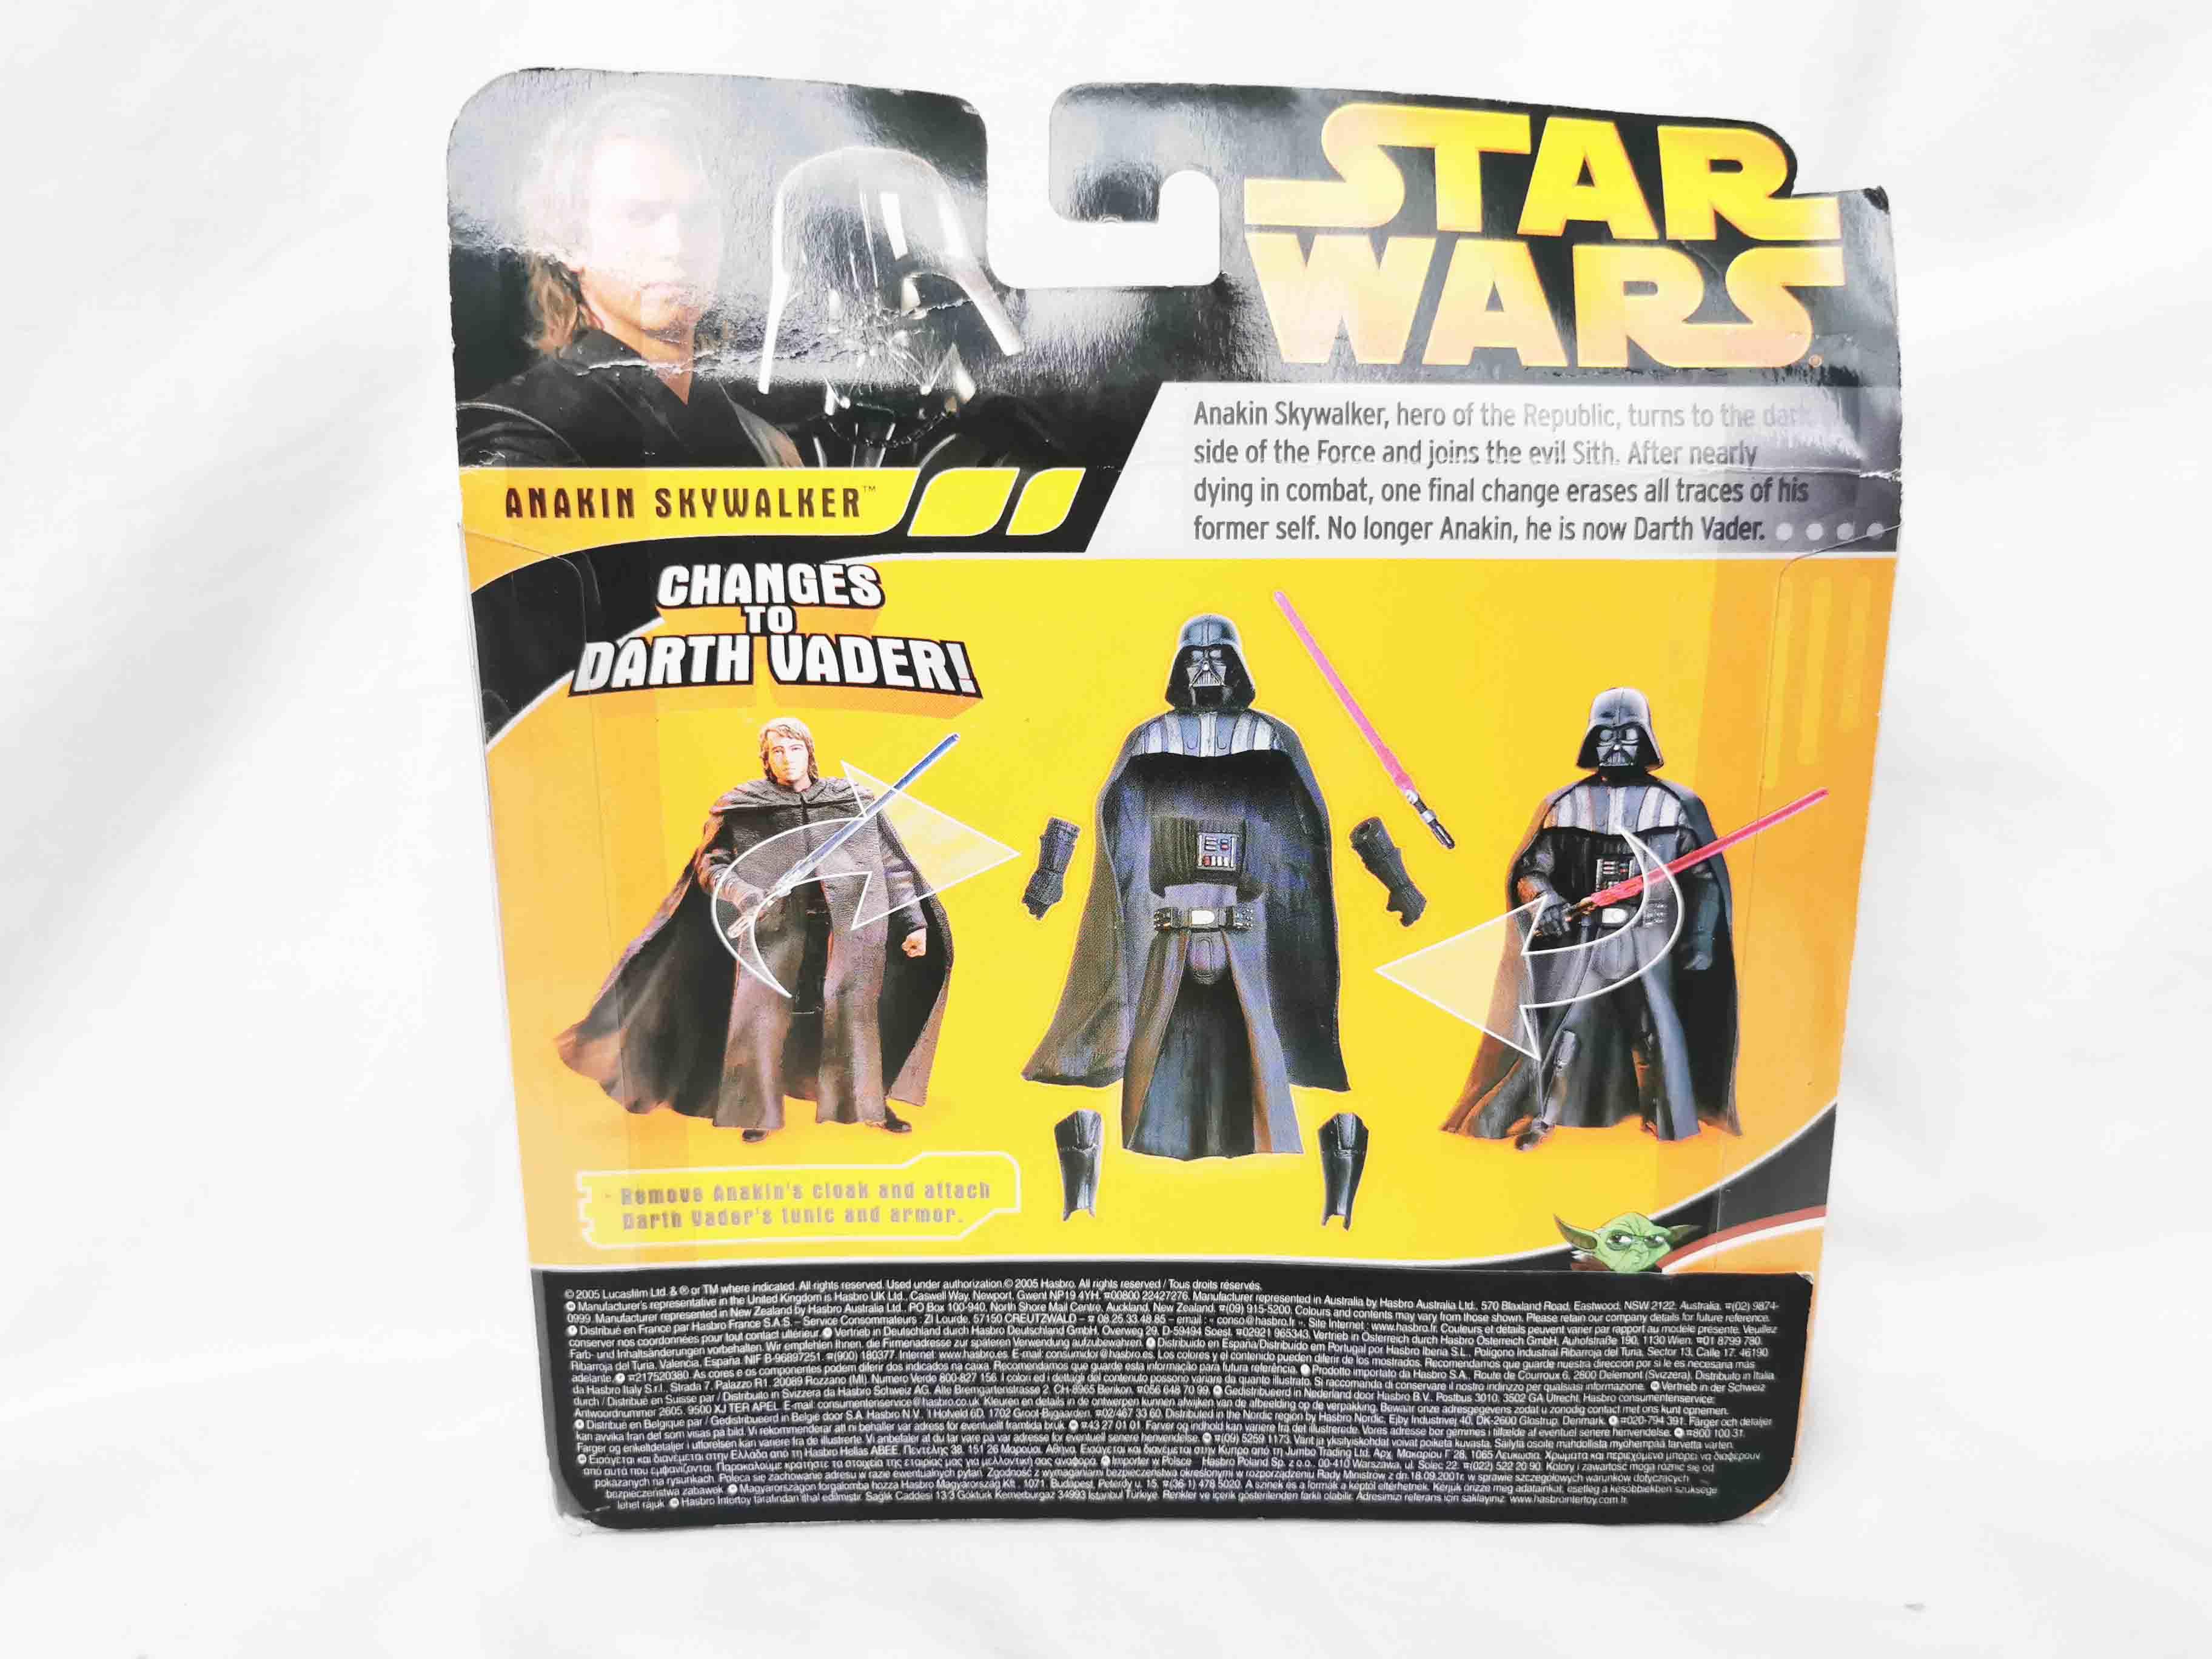 Star Wars Anakin Changes to Darth Vader Revenge of The Sith Action Figure 3.75”